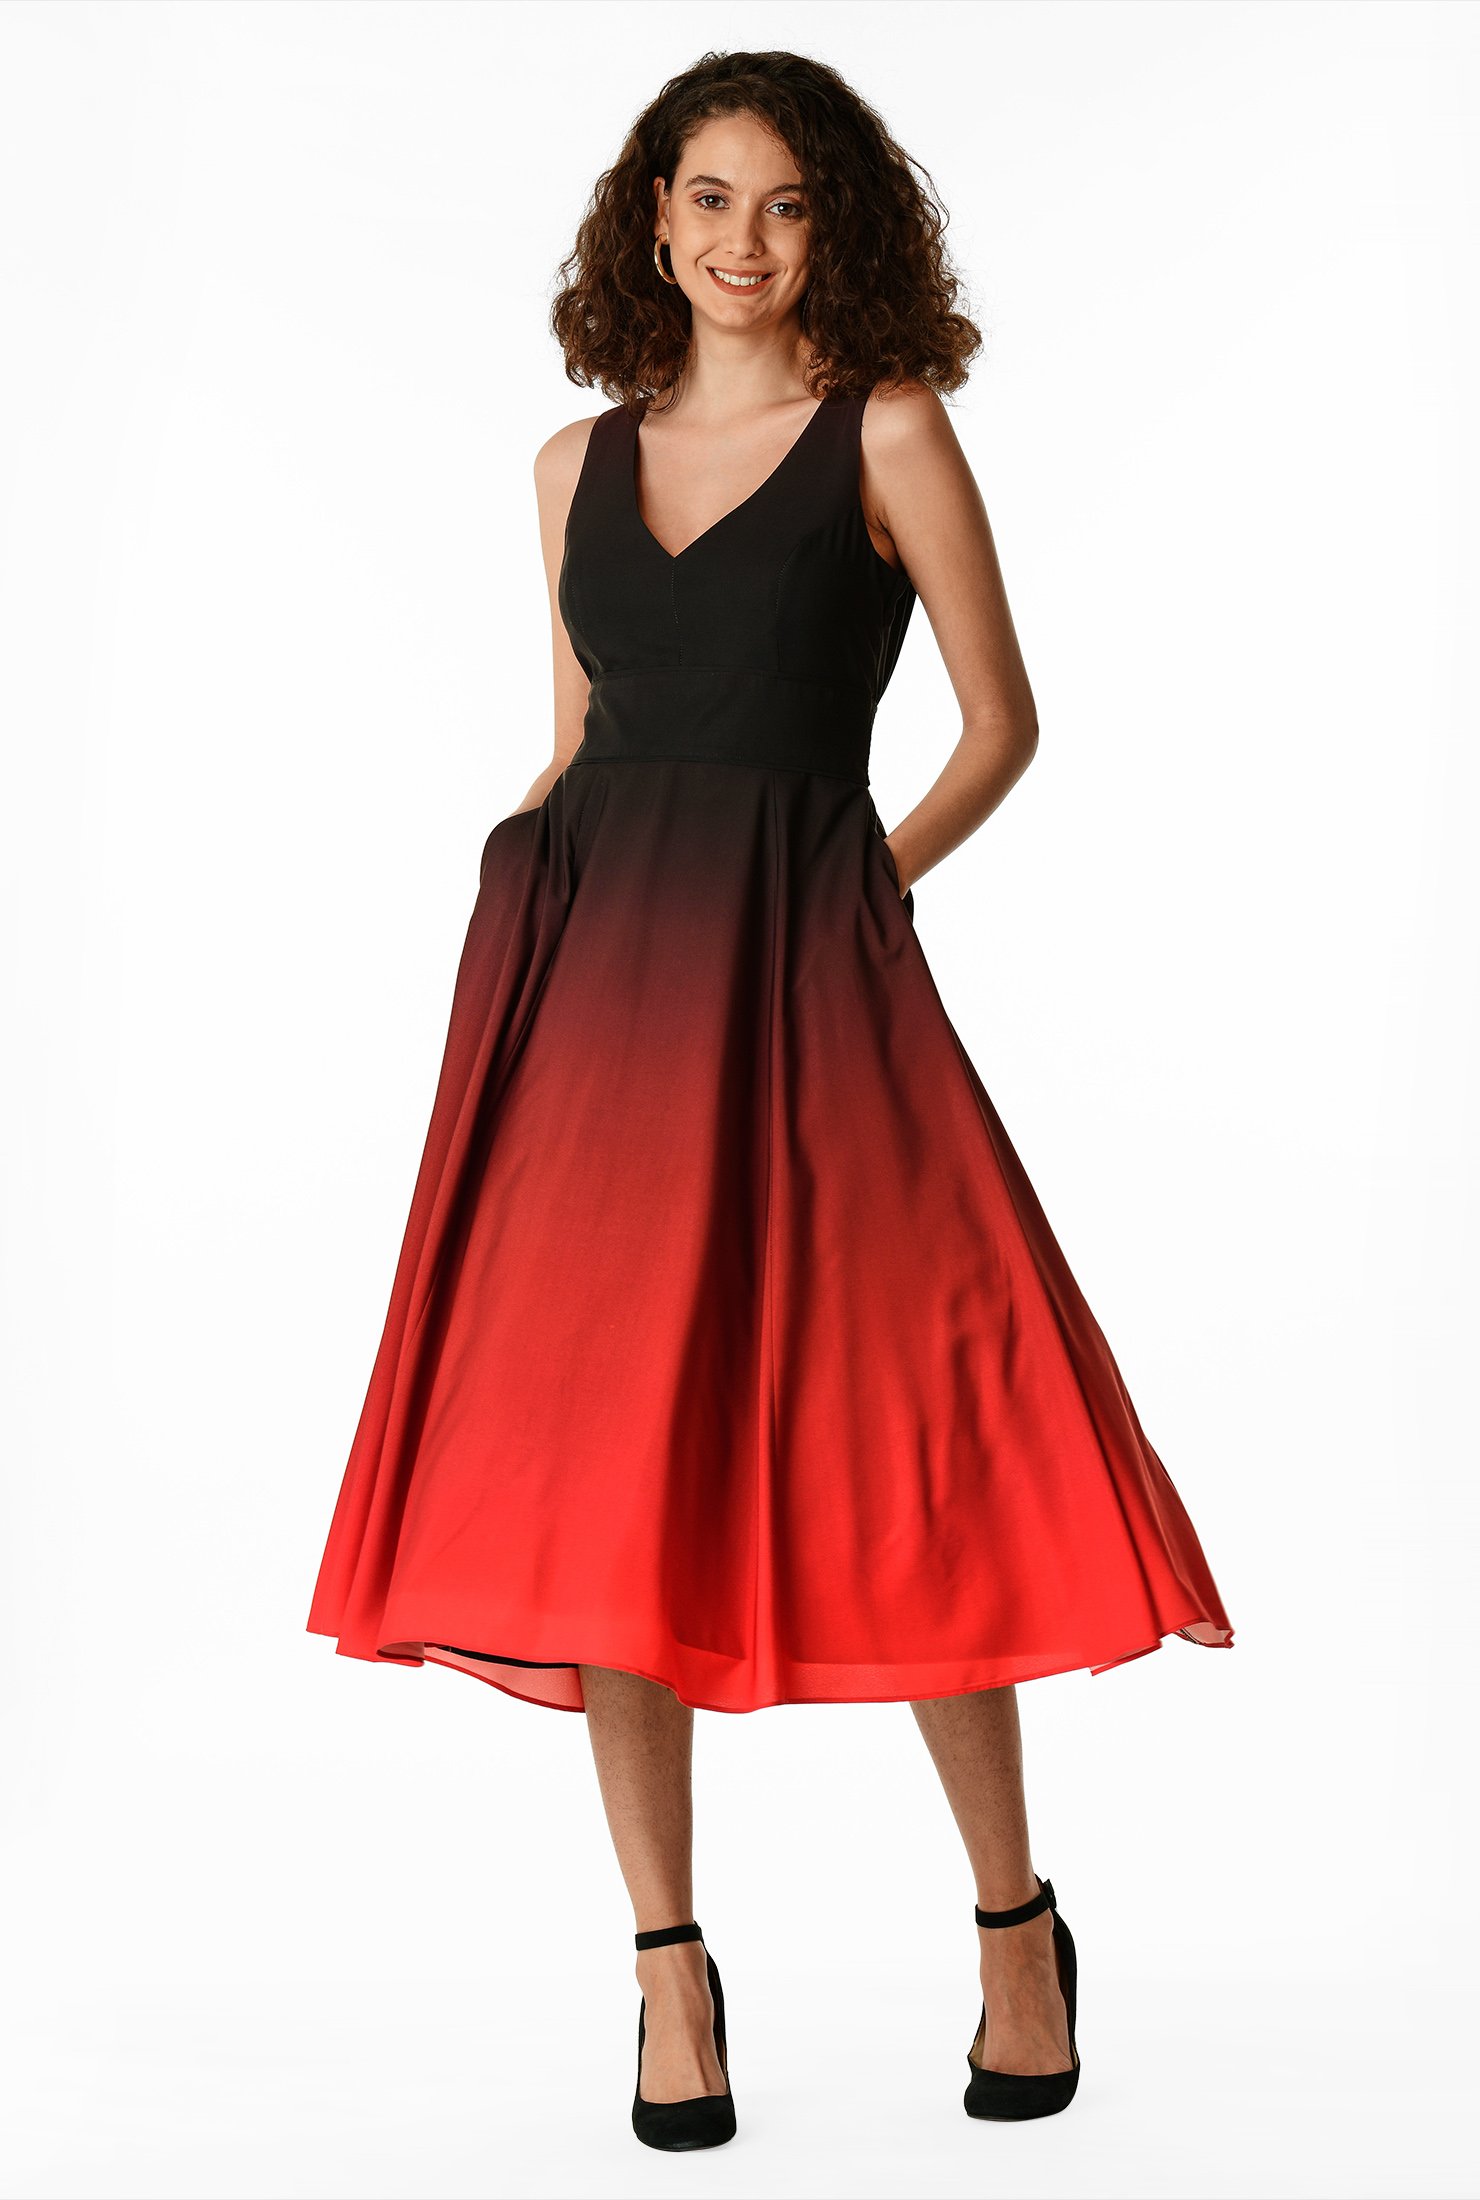 red to black ombre dress